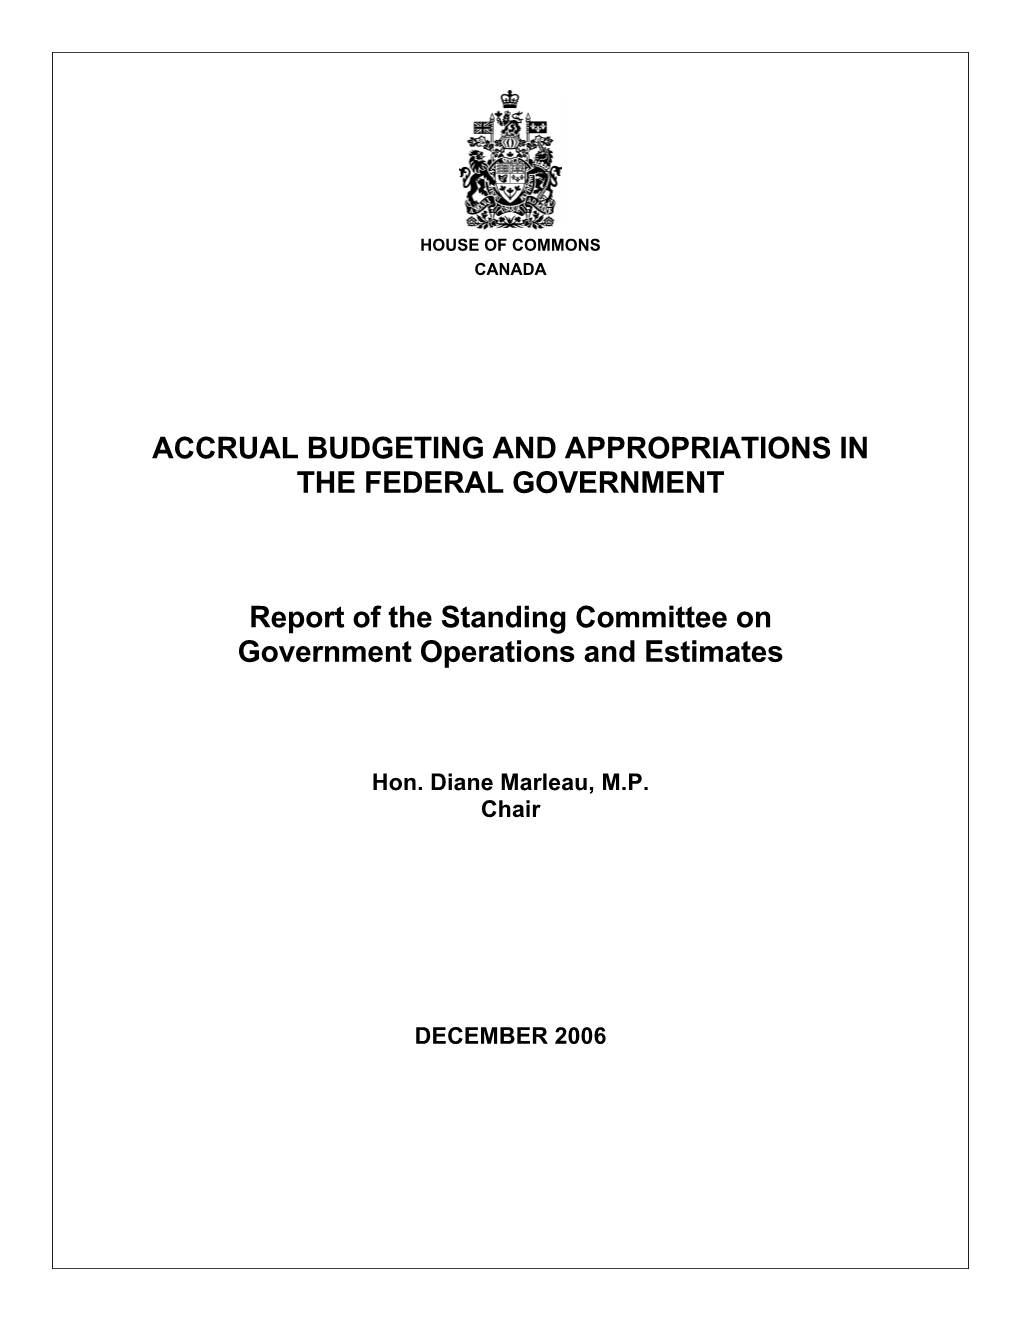 Accrual Budgeting and Appropriations in the Federal Government